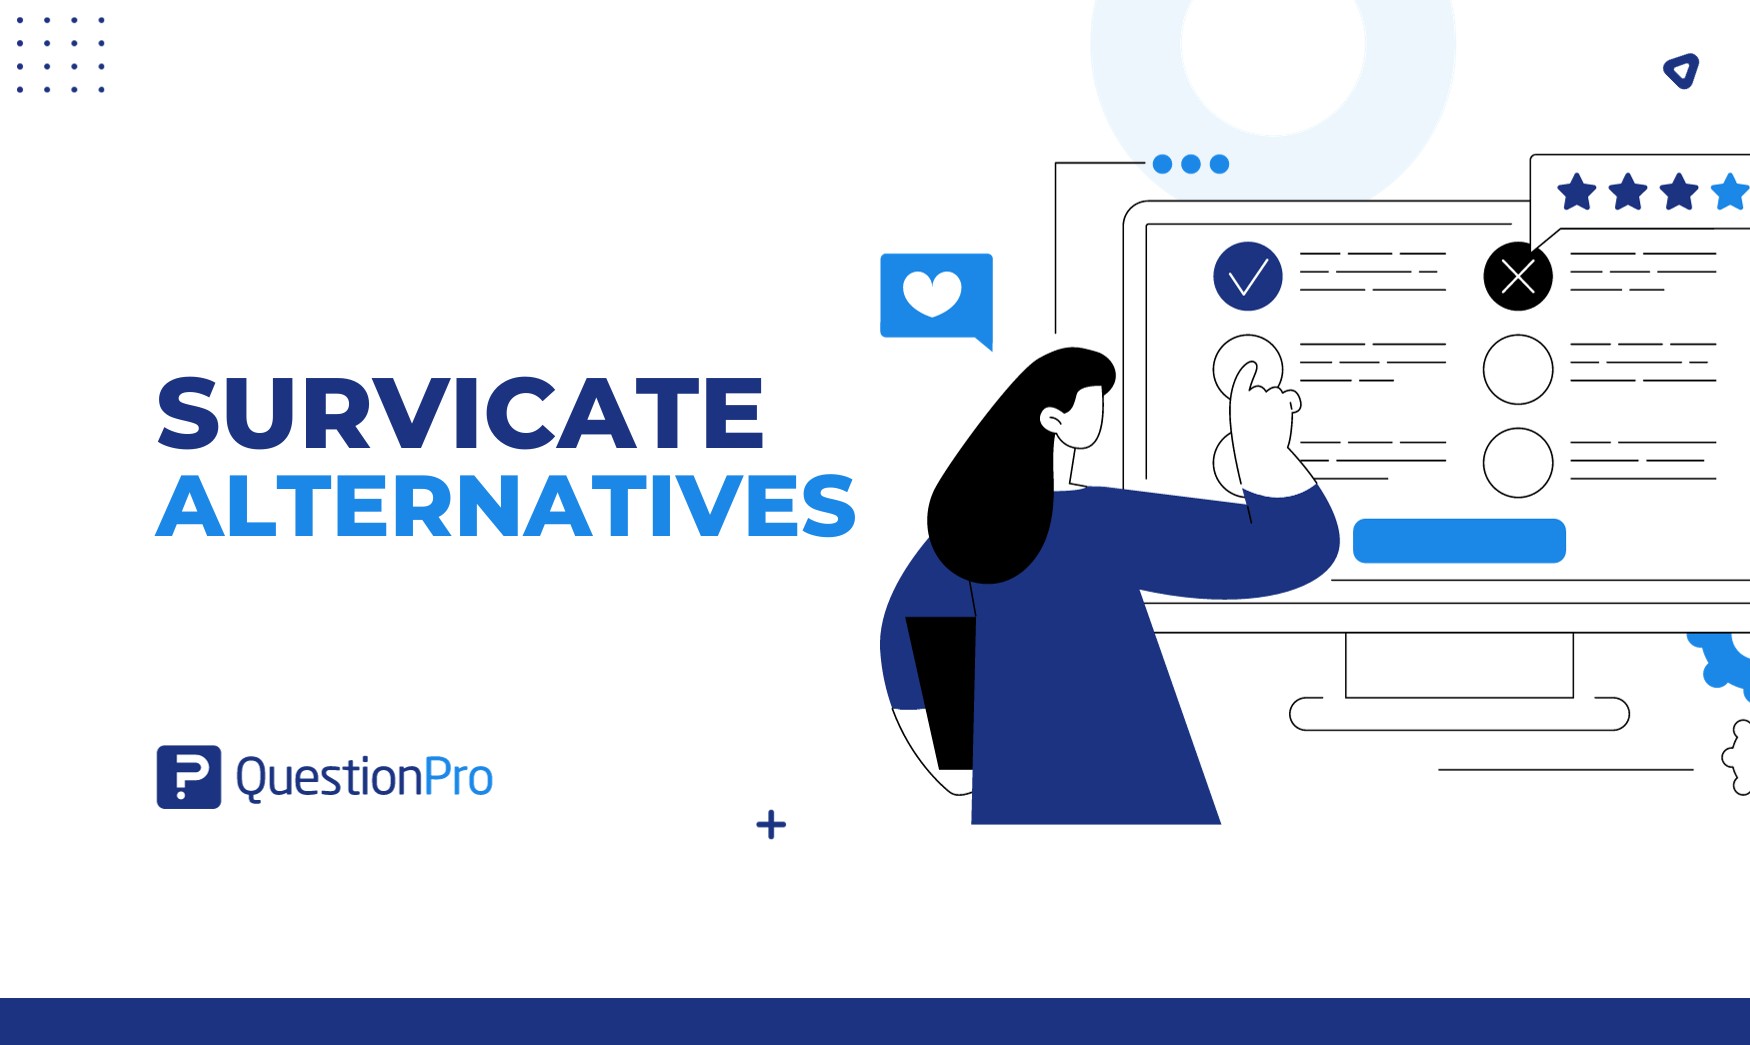 Top 10 Survicate alternatives for customer feedback in 2023. Explore versatile options to enhance your feedback collection efforts.